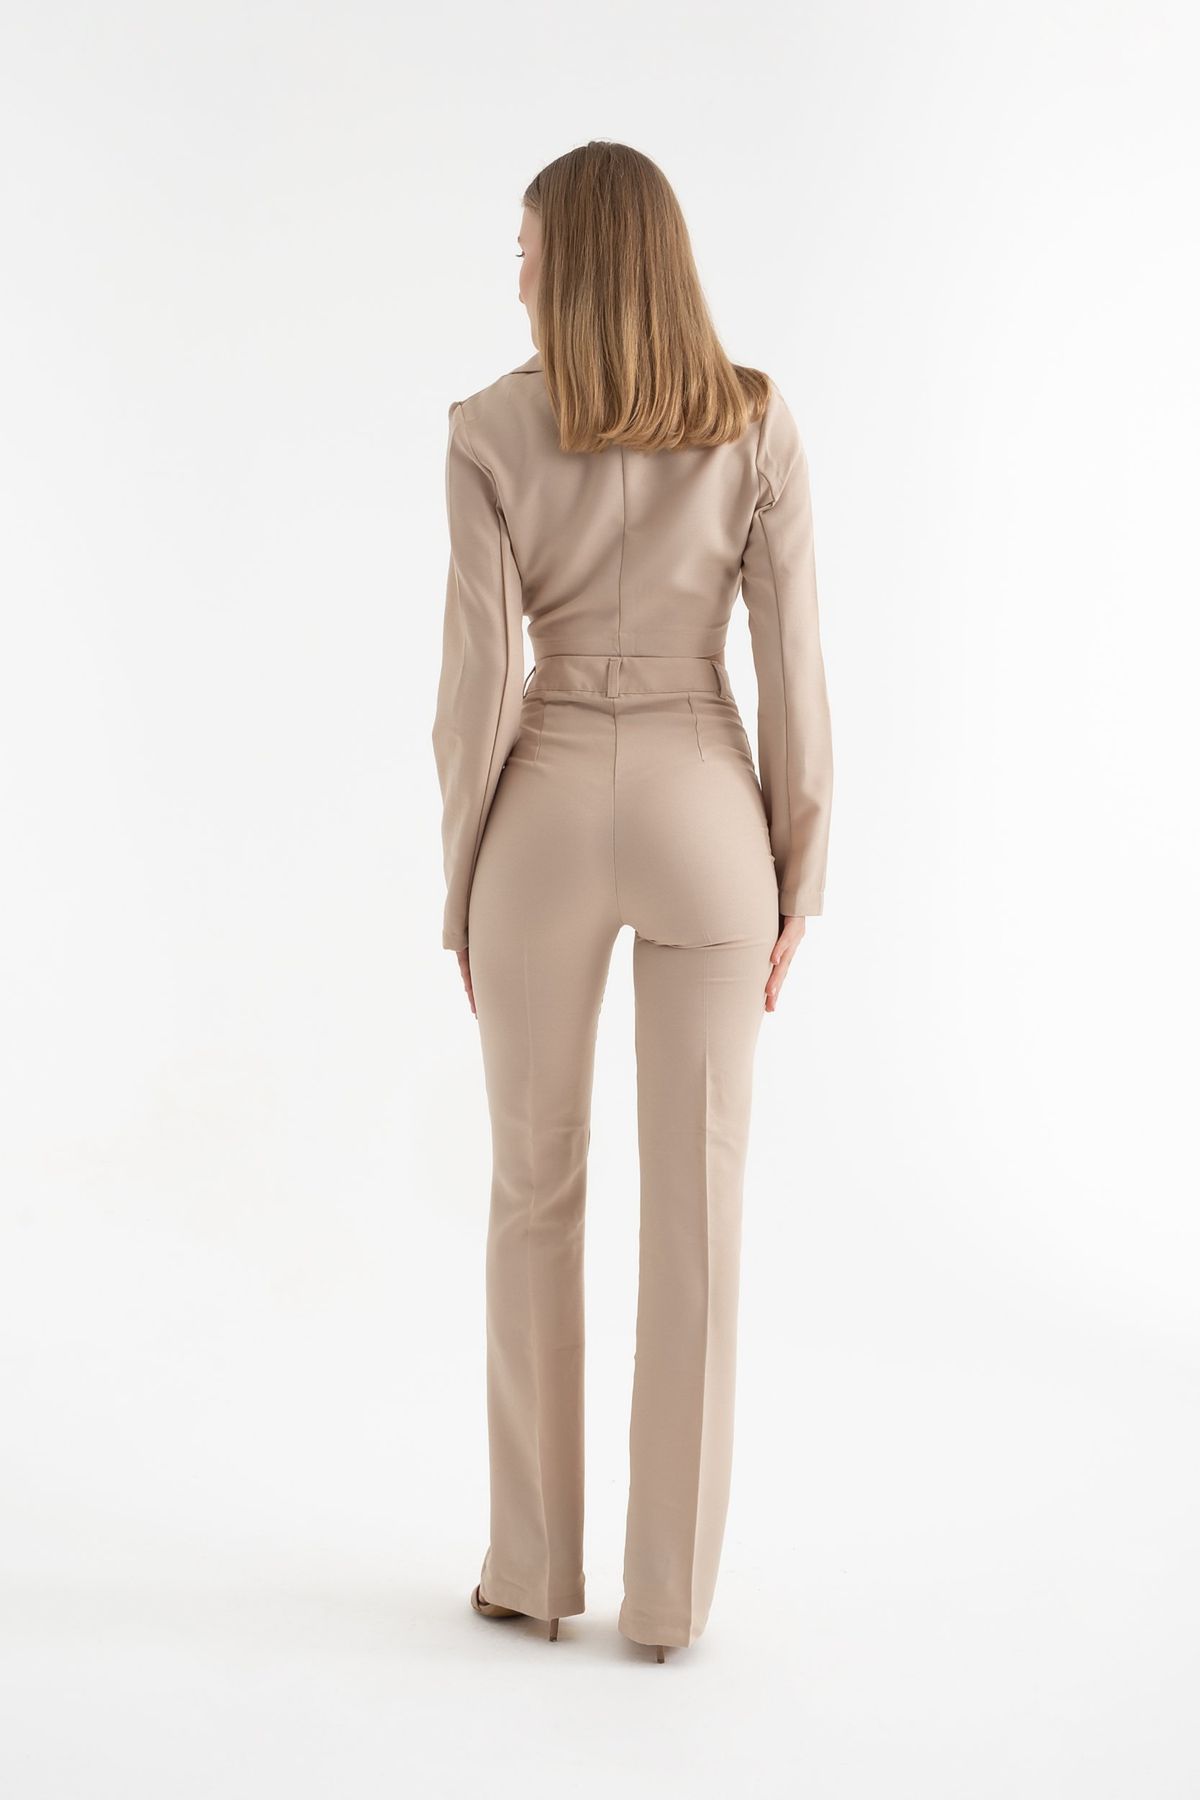 2 Pieces: Cropped Shirt with a Tie Up Detail & High Waist Straight Leg Trousers